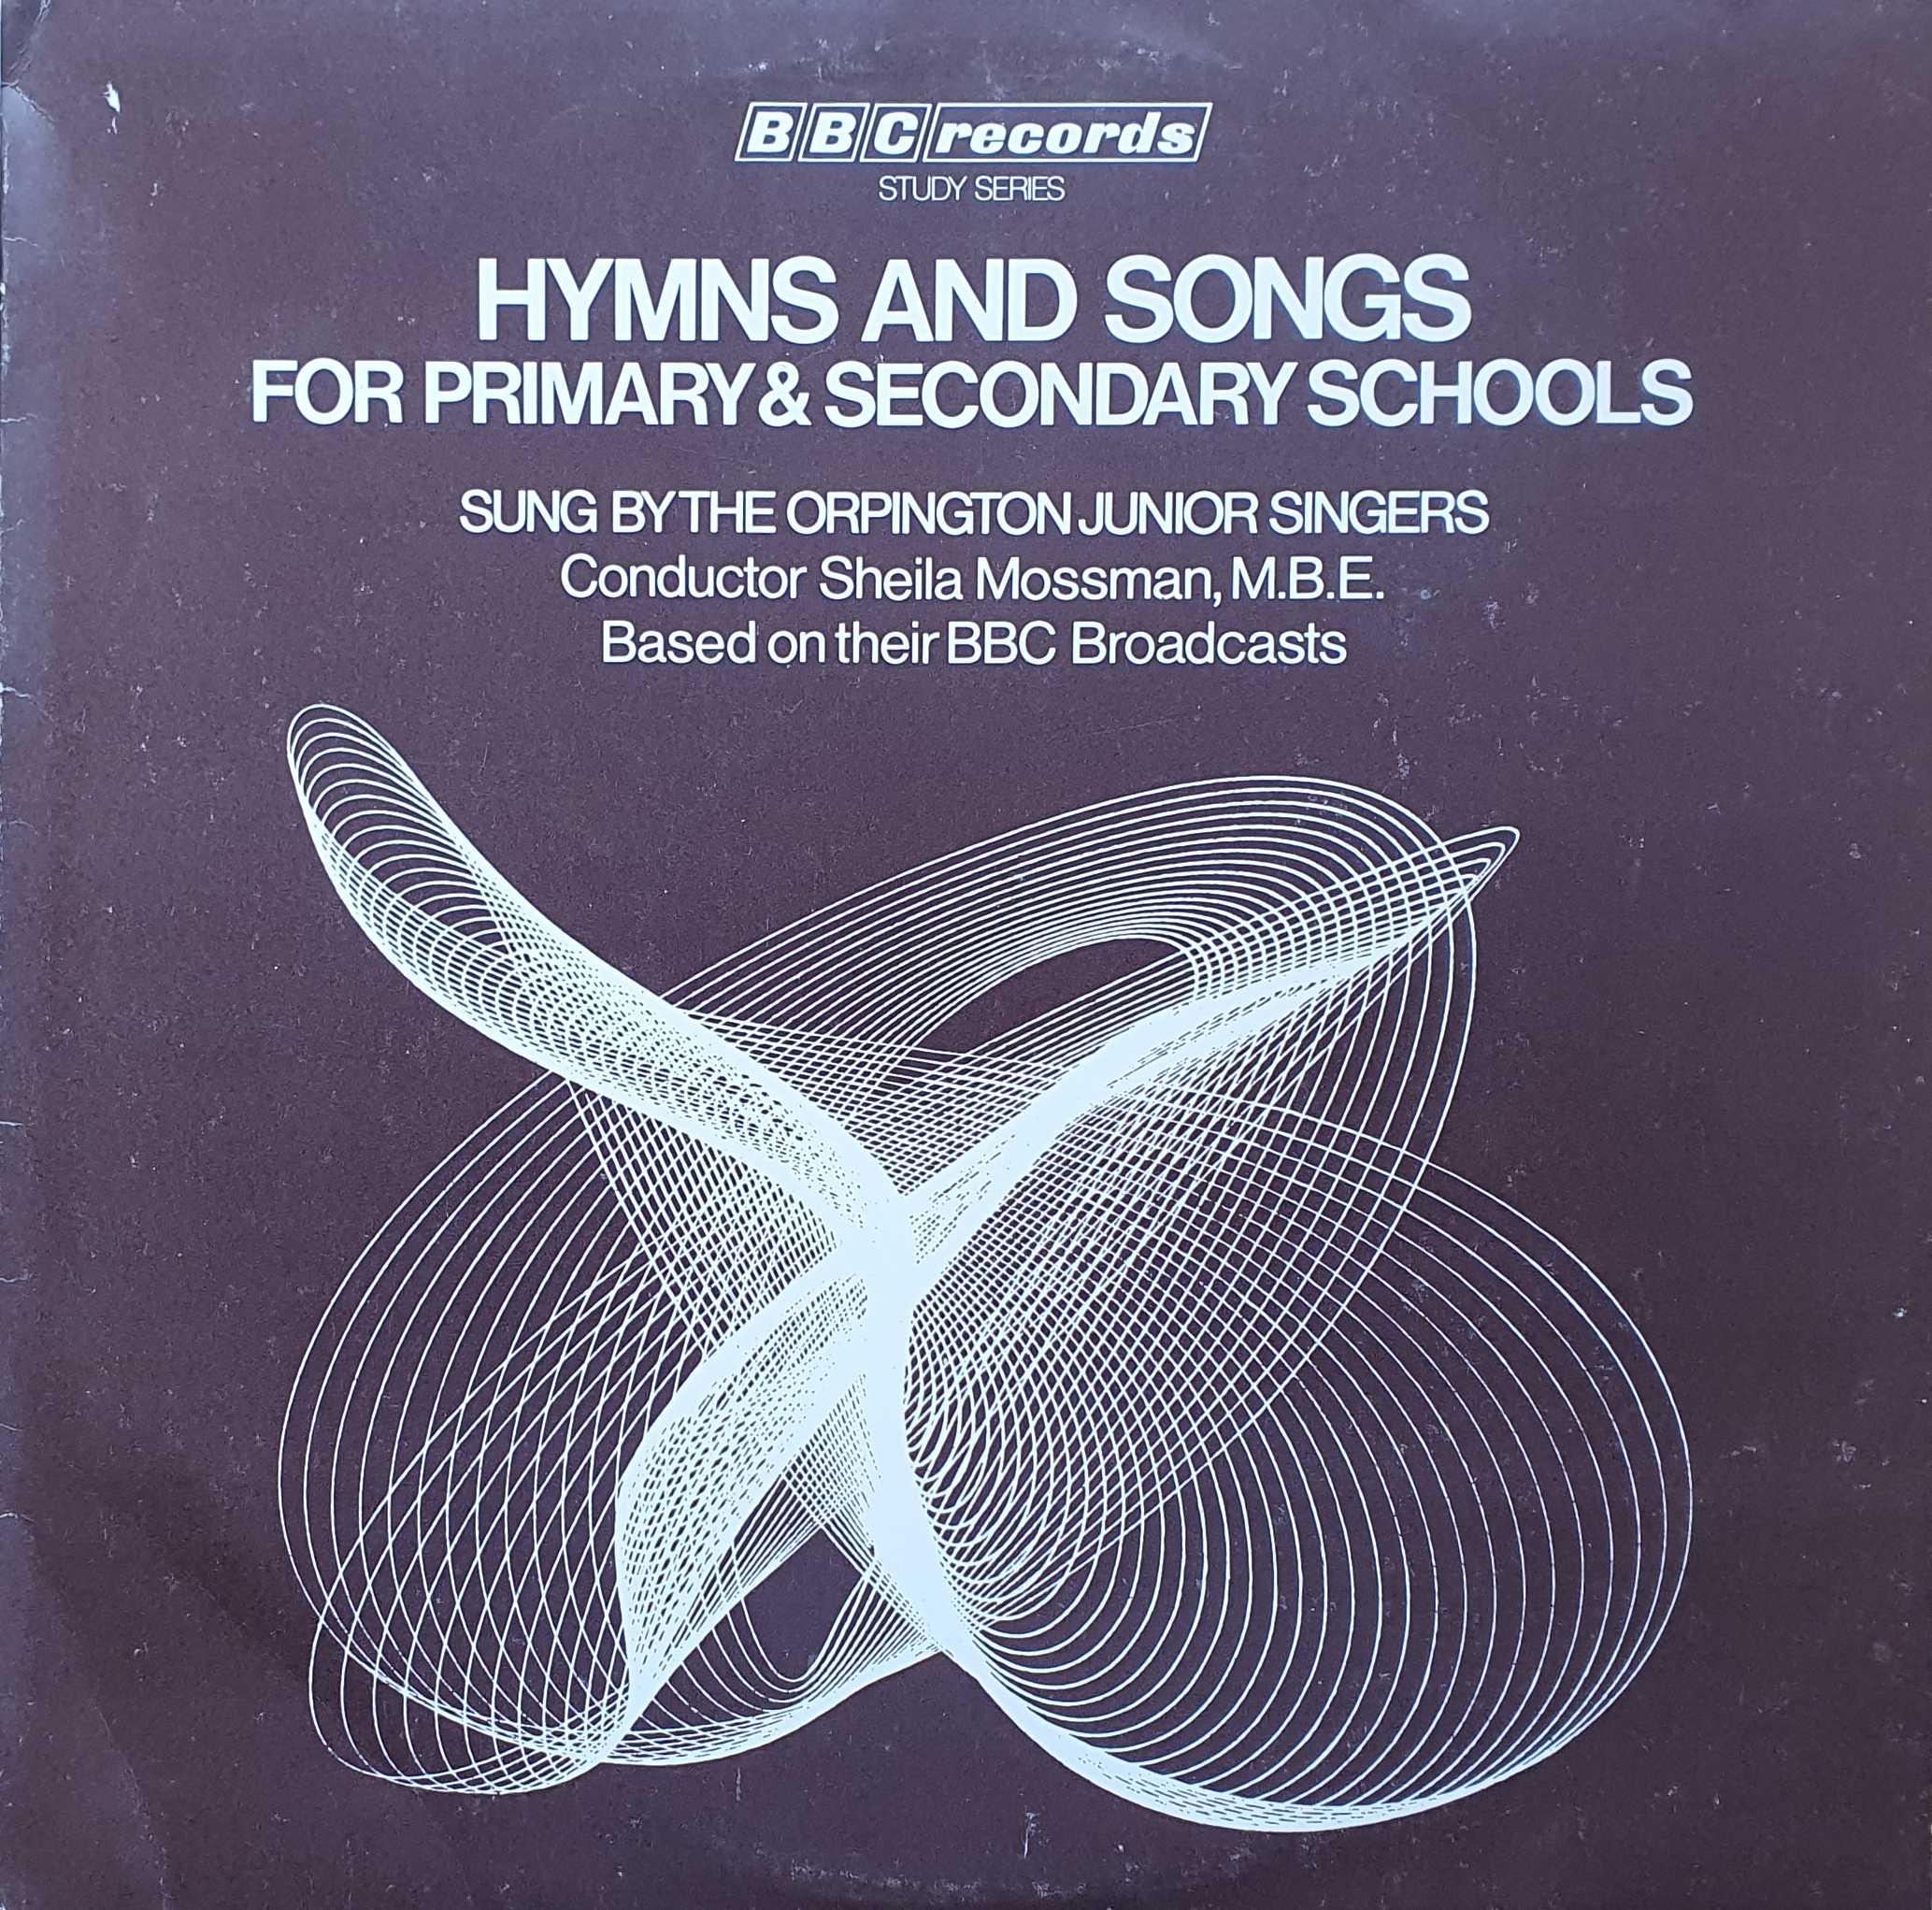 Picture of RESR 22 Hymns and songs for Primary and Secondary schools by artist Various / Oprington Junior Singers from the BBC albums - Records and Tapes library